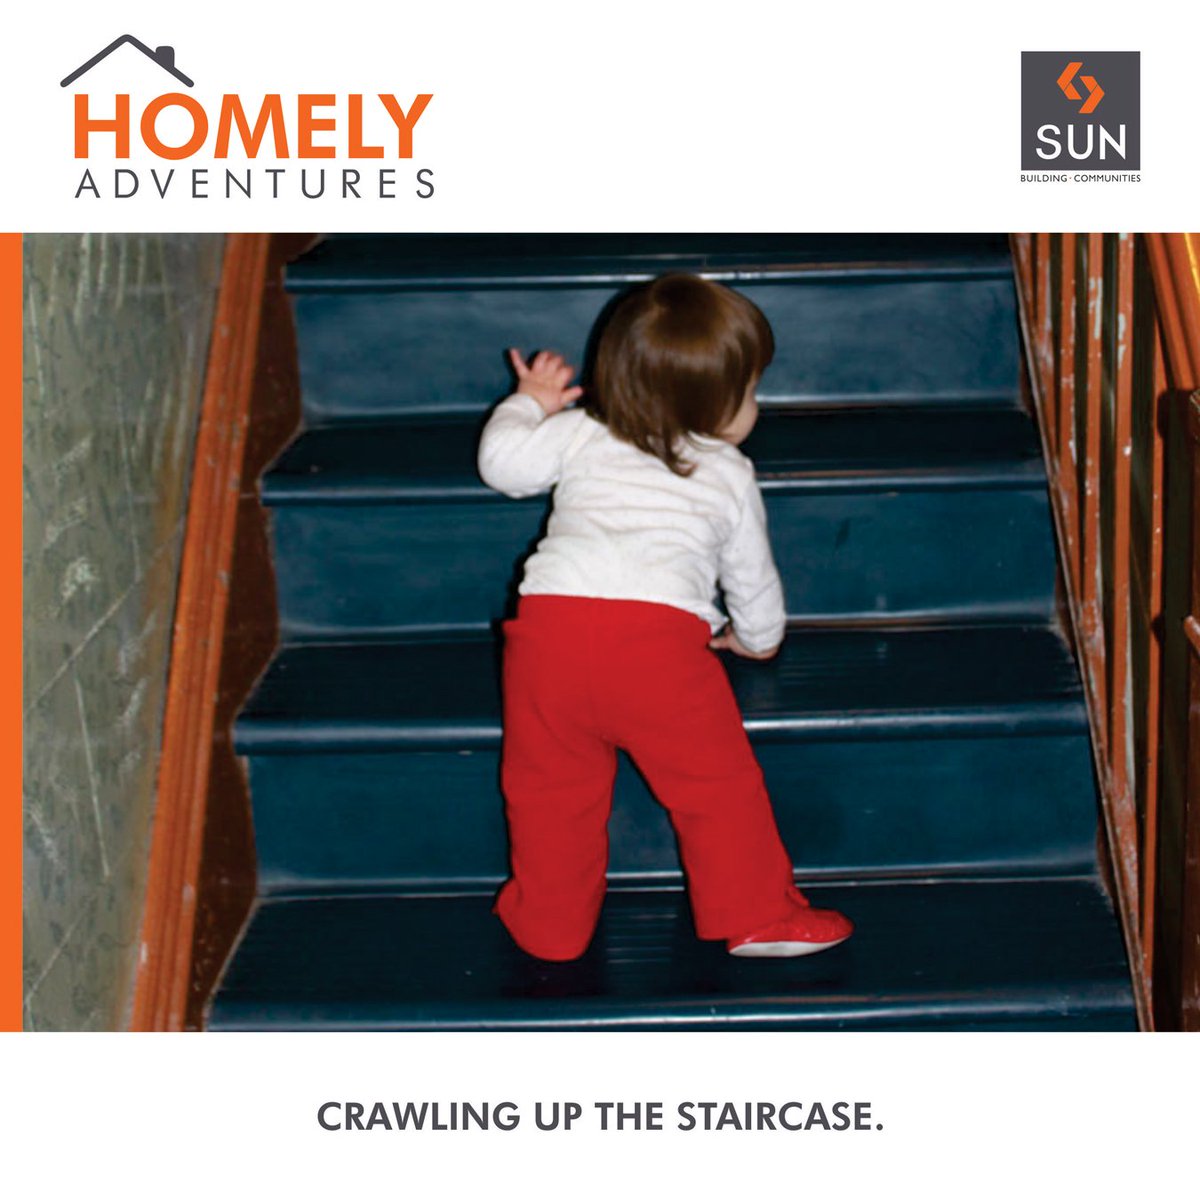 #HomelyAdventures:
The most adorable moment of tiny feet climbing stairs can be witnessed only at home. https://t.co/KCimY6FRui